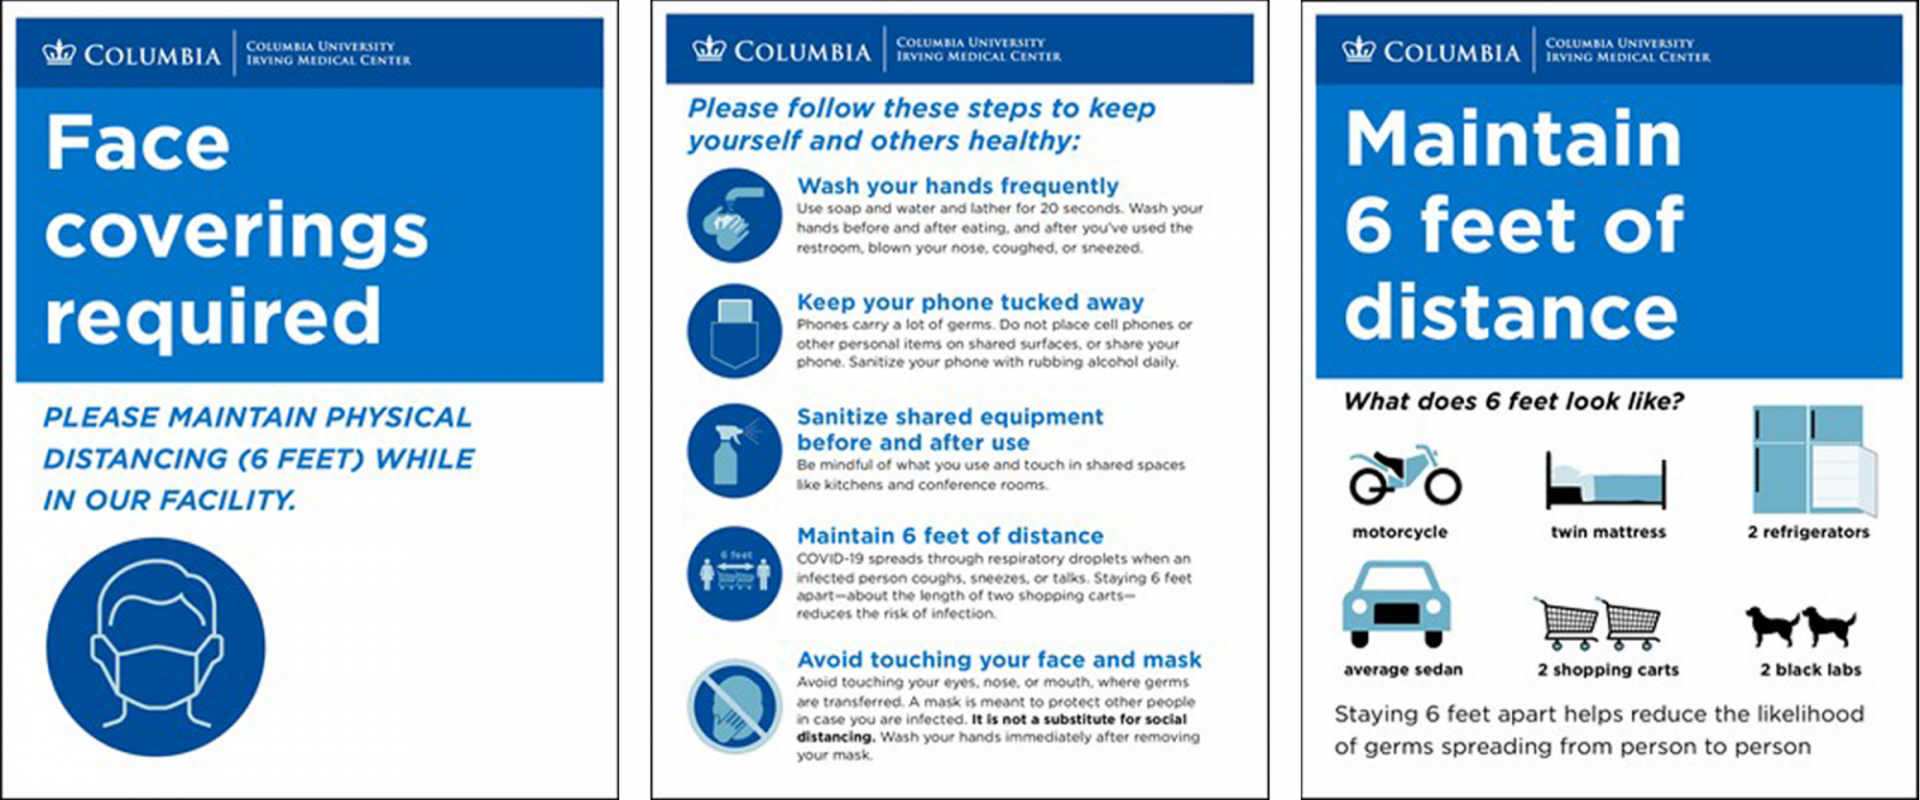 examples of signage for CUIMC regarding wearing face coverings and maintaining six feet of distance